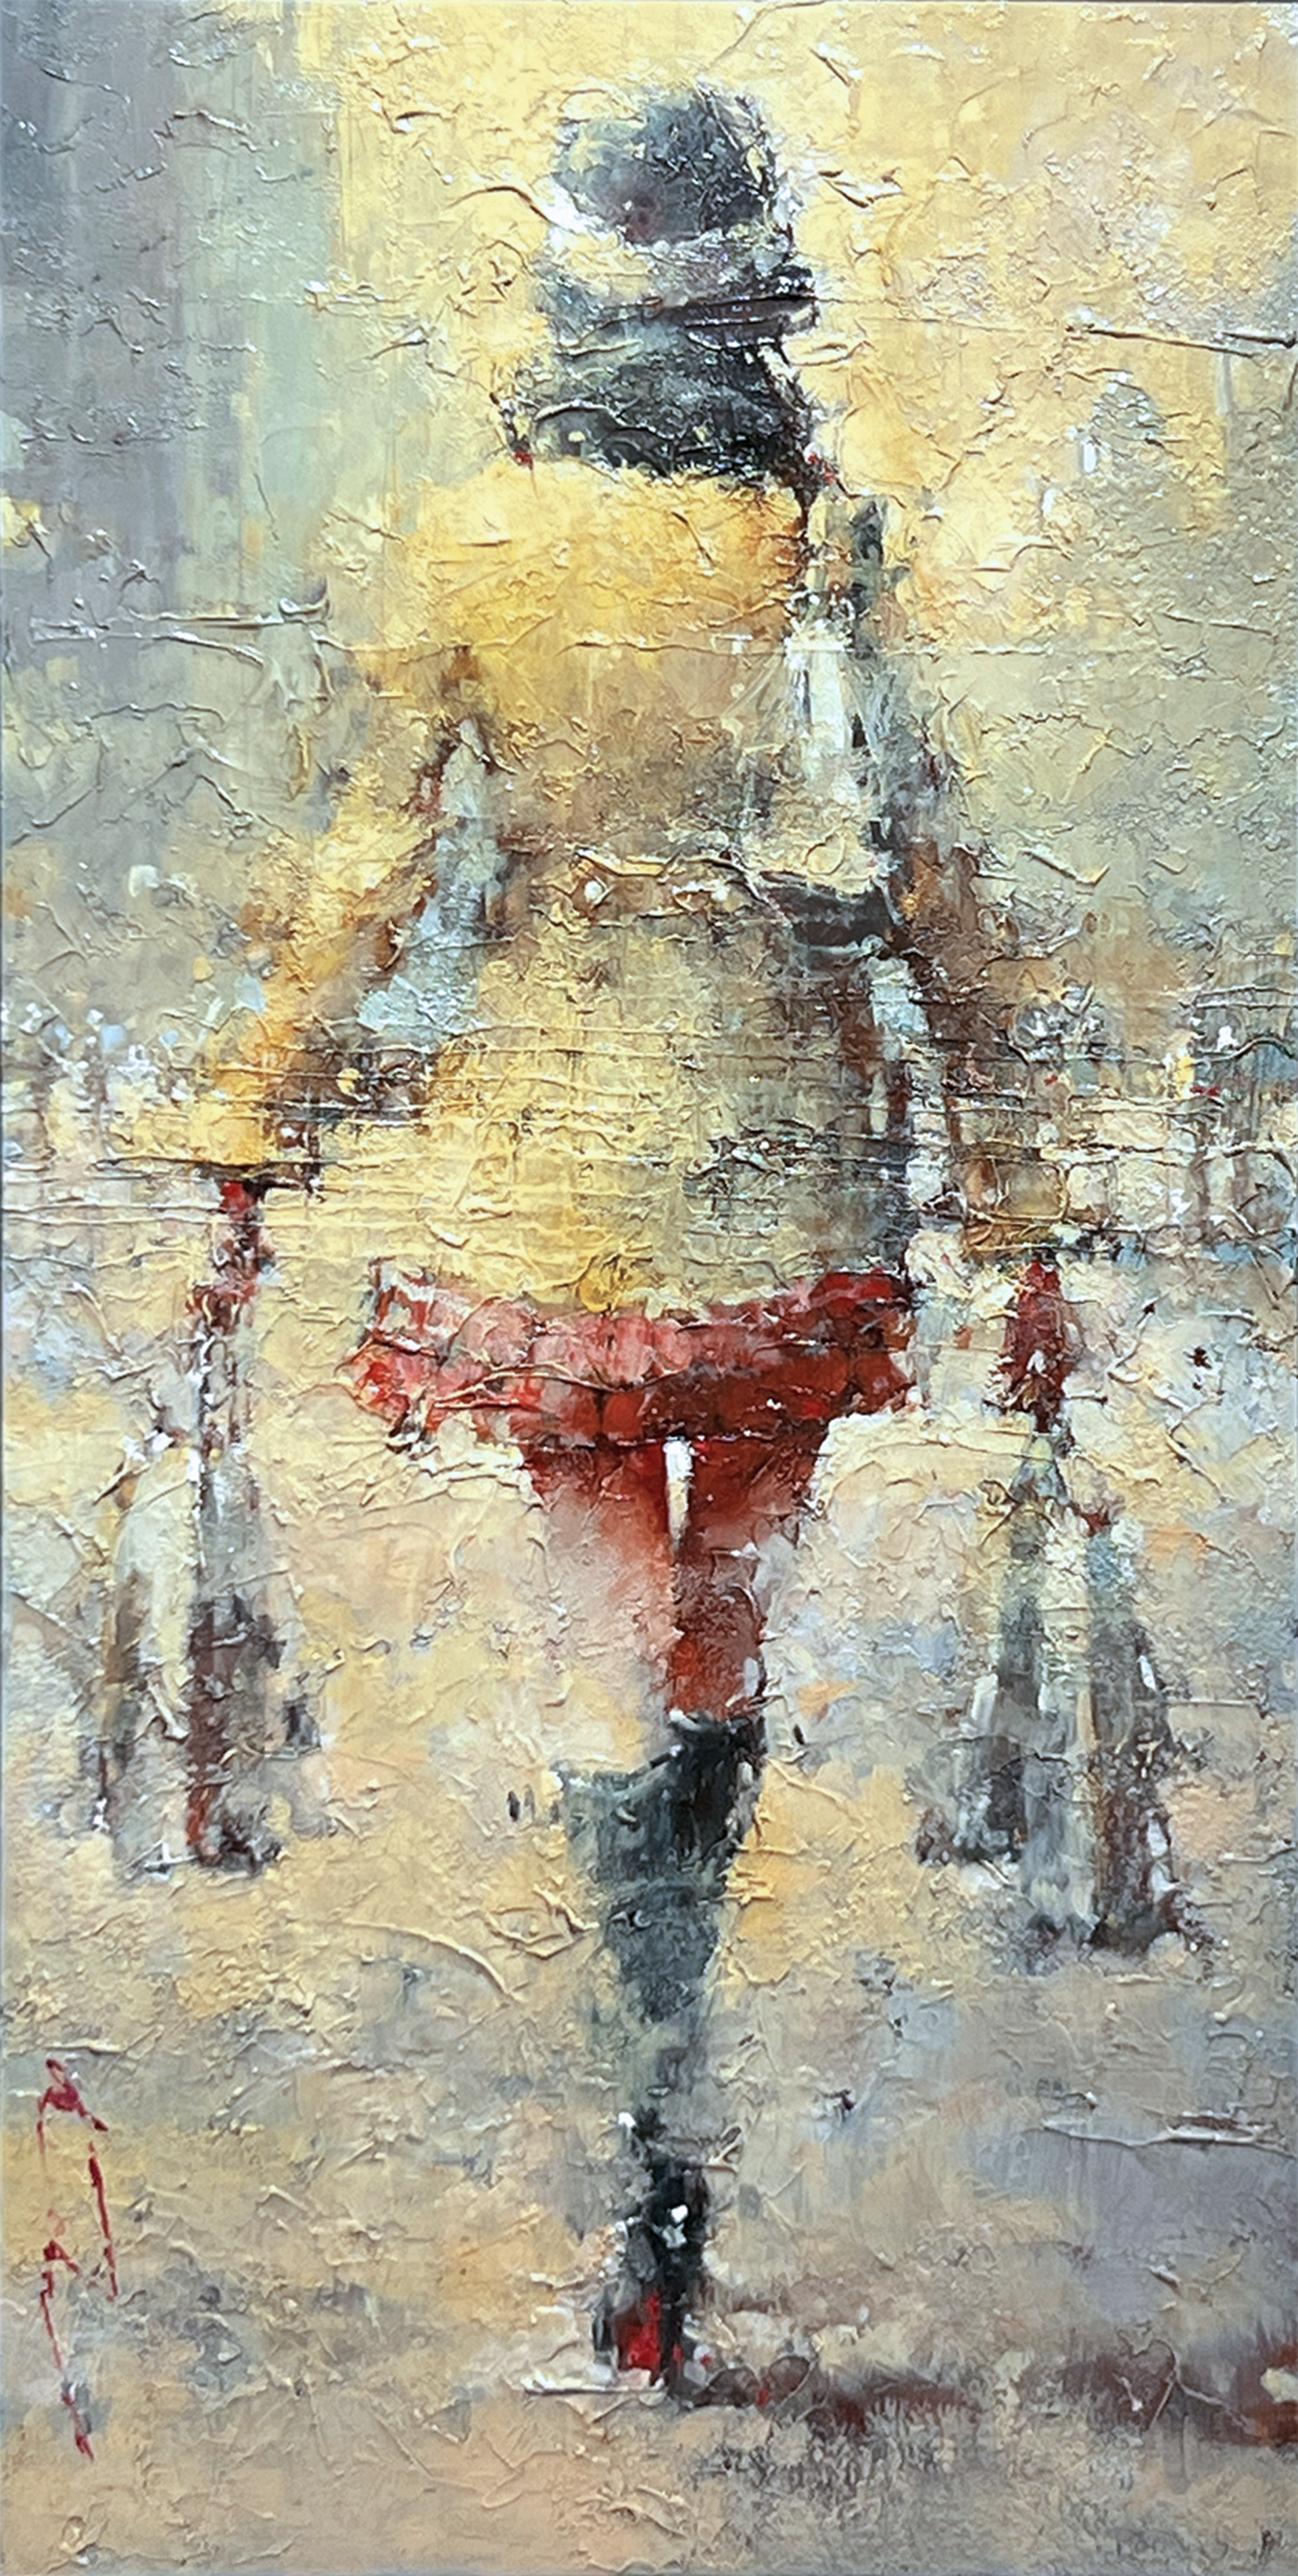 "On the Theme of Yellow" by Andre Kohn